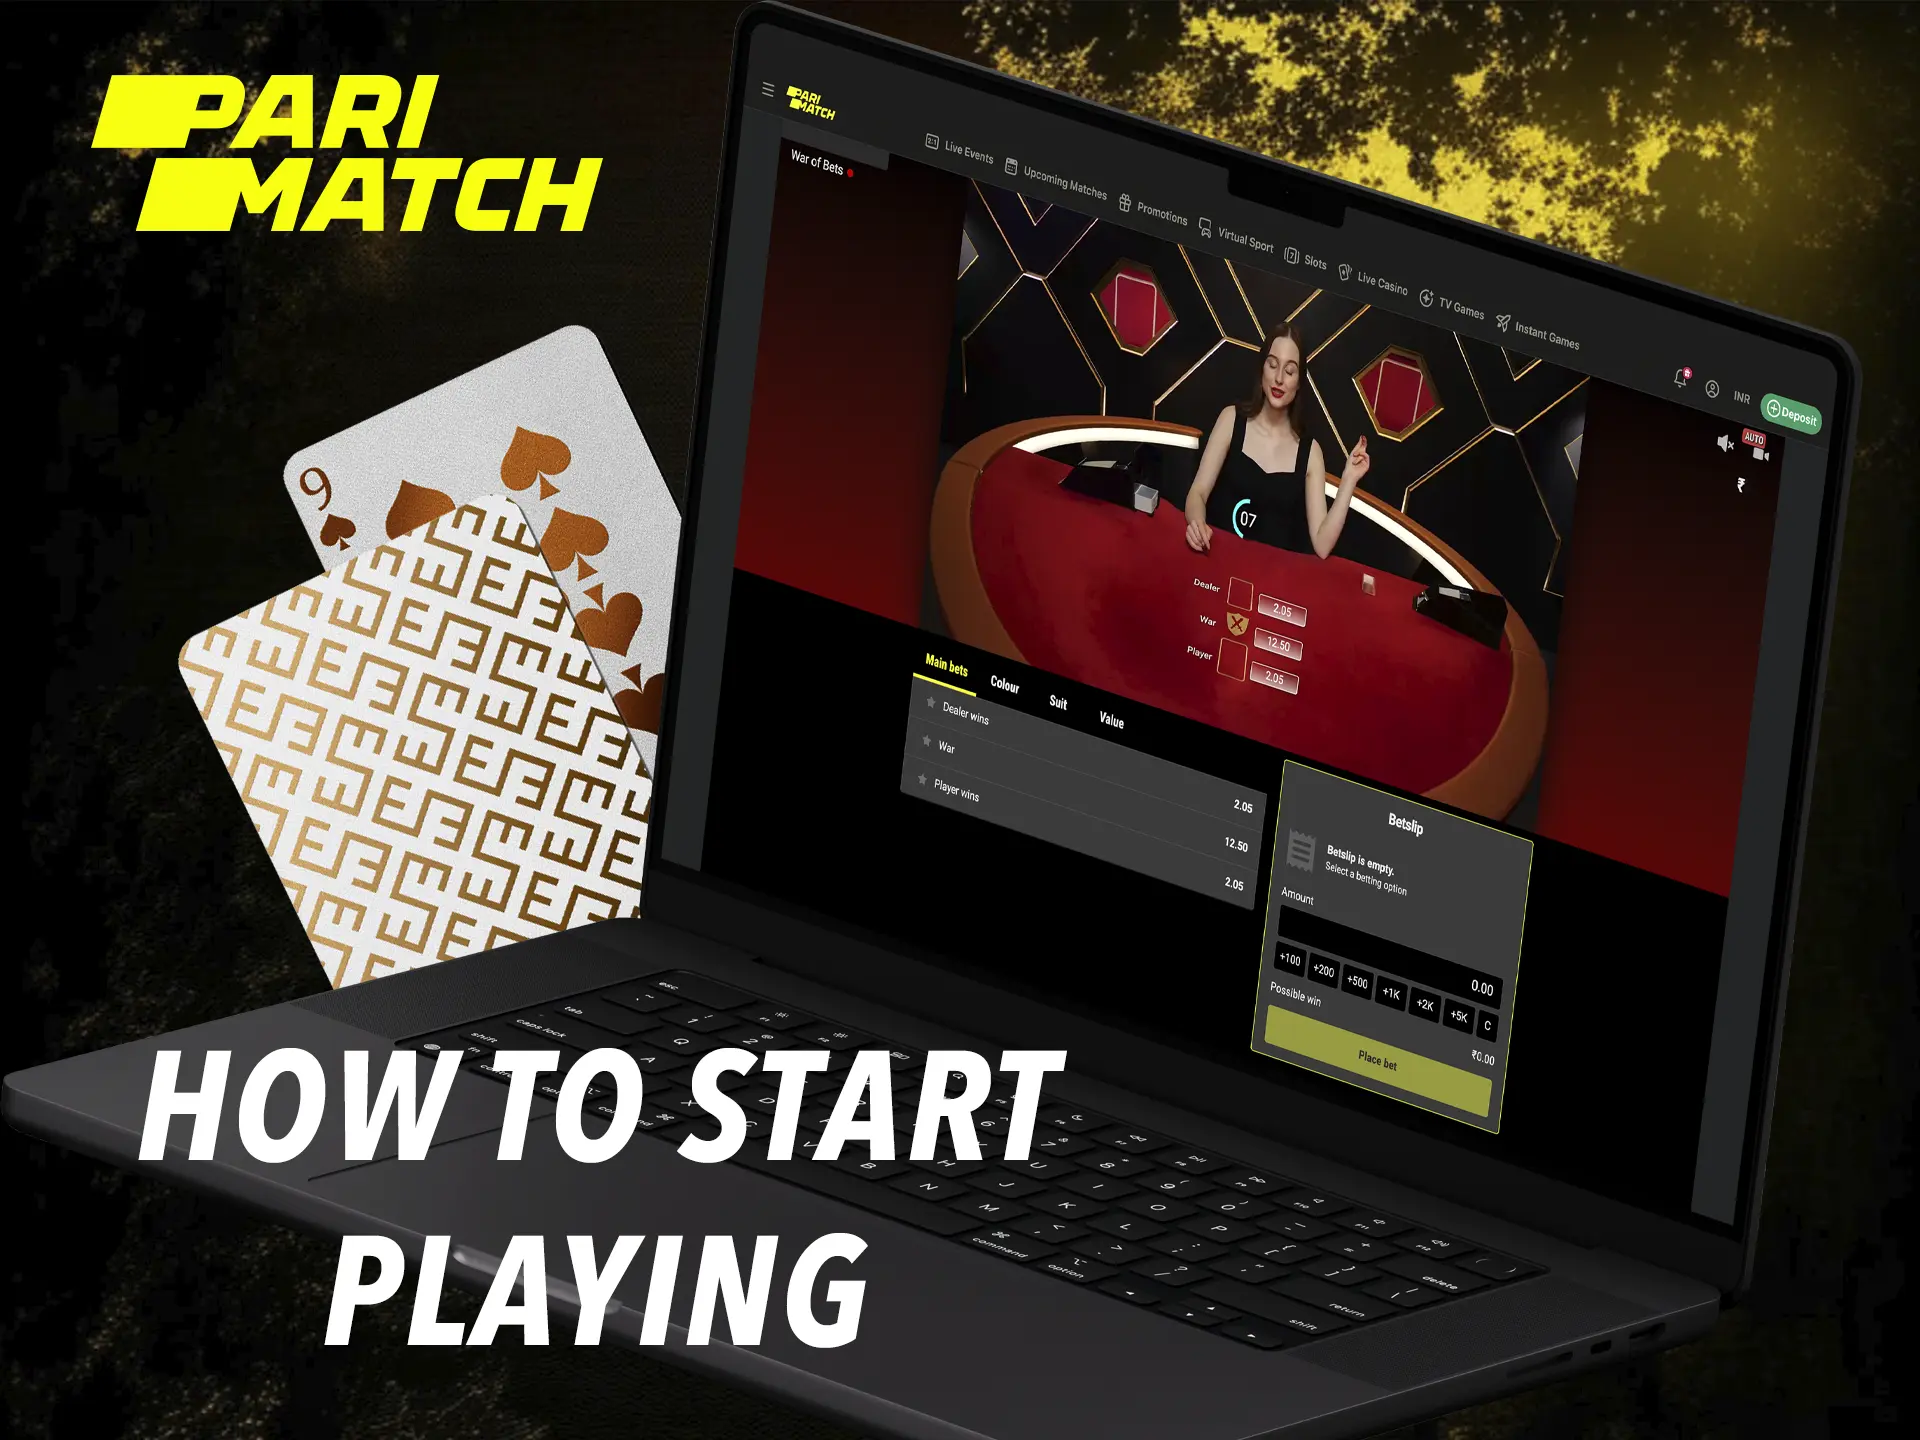 Start your immersion in TV games from Parimatch by completing a simple registration.